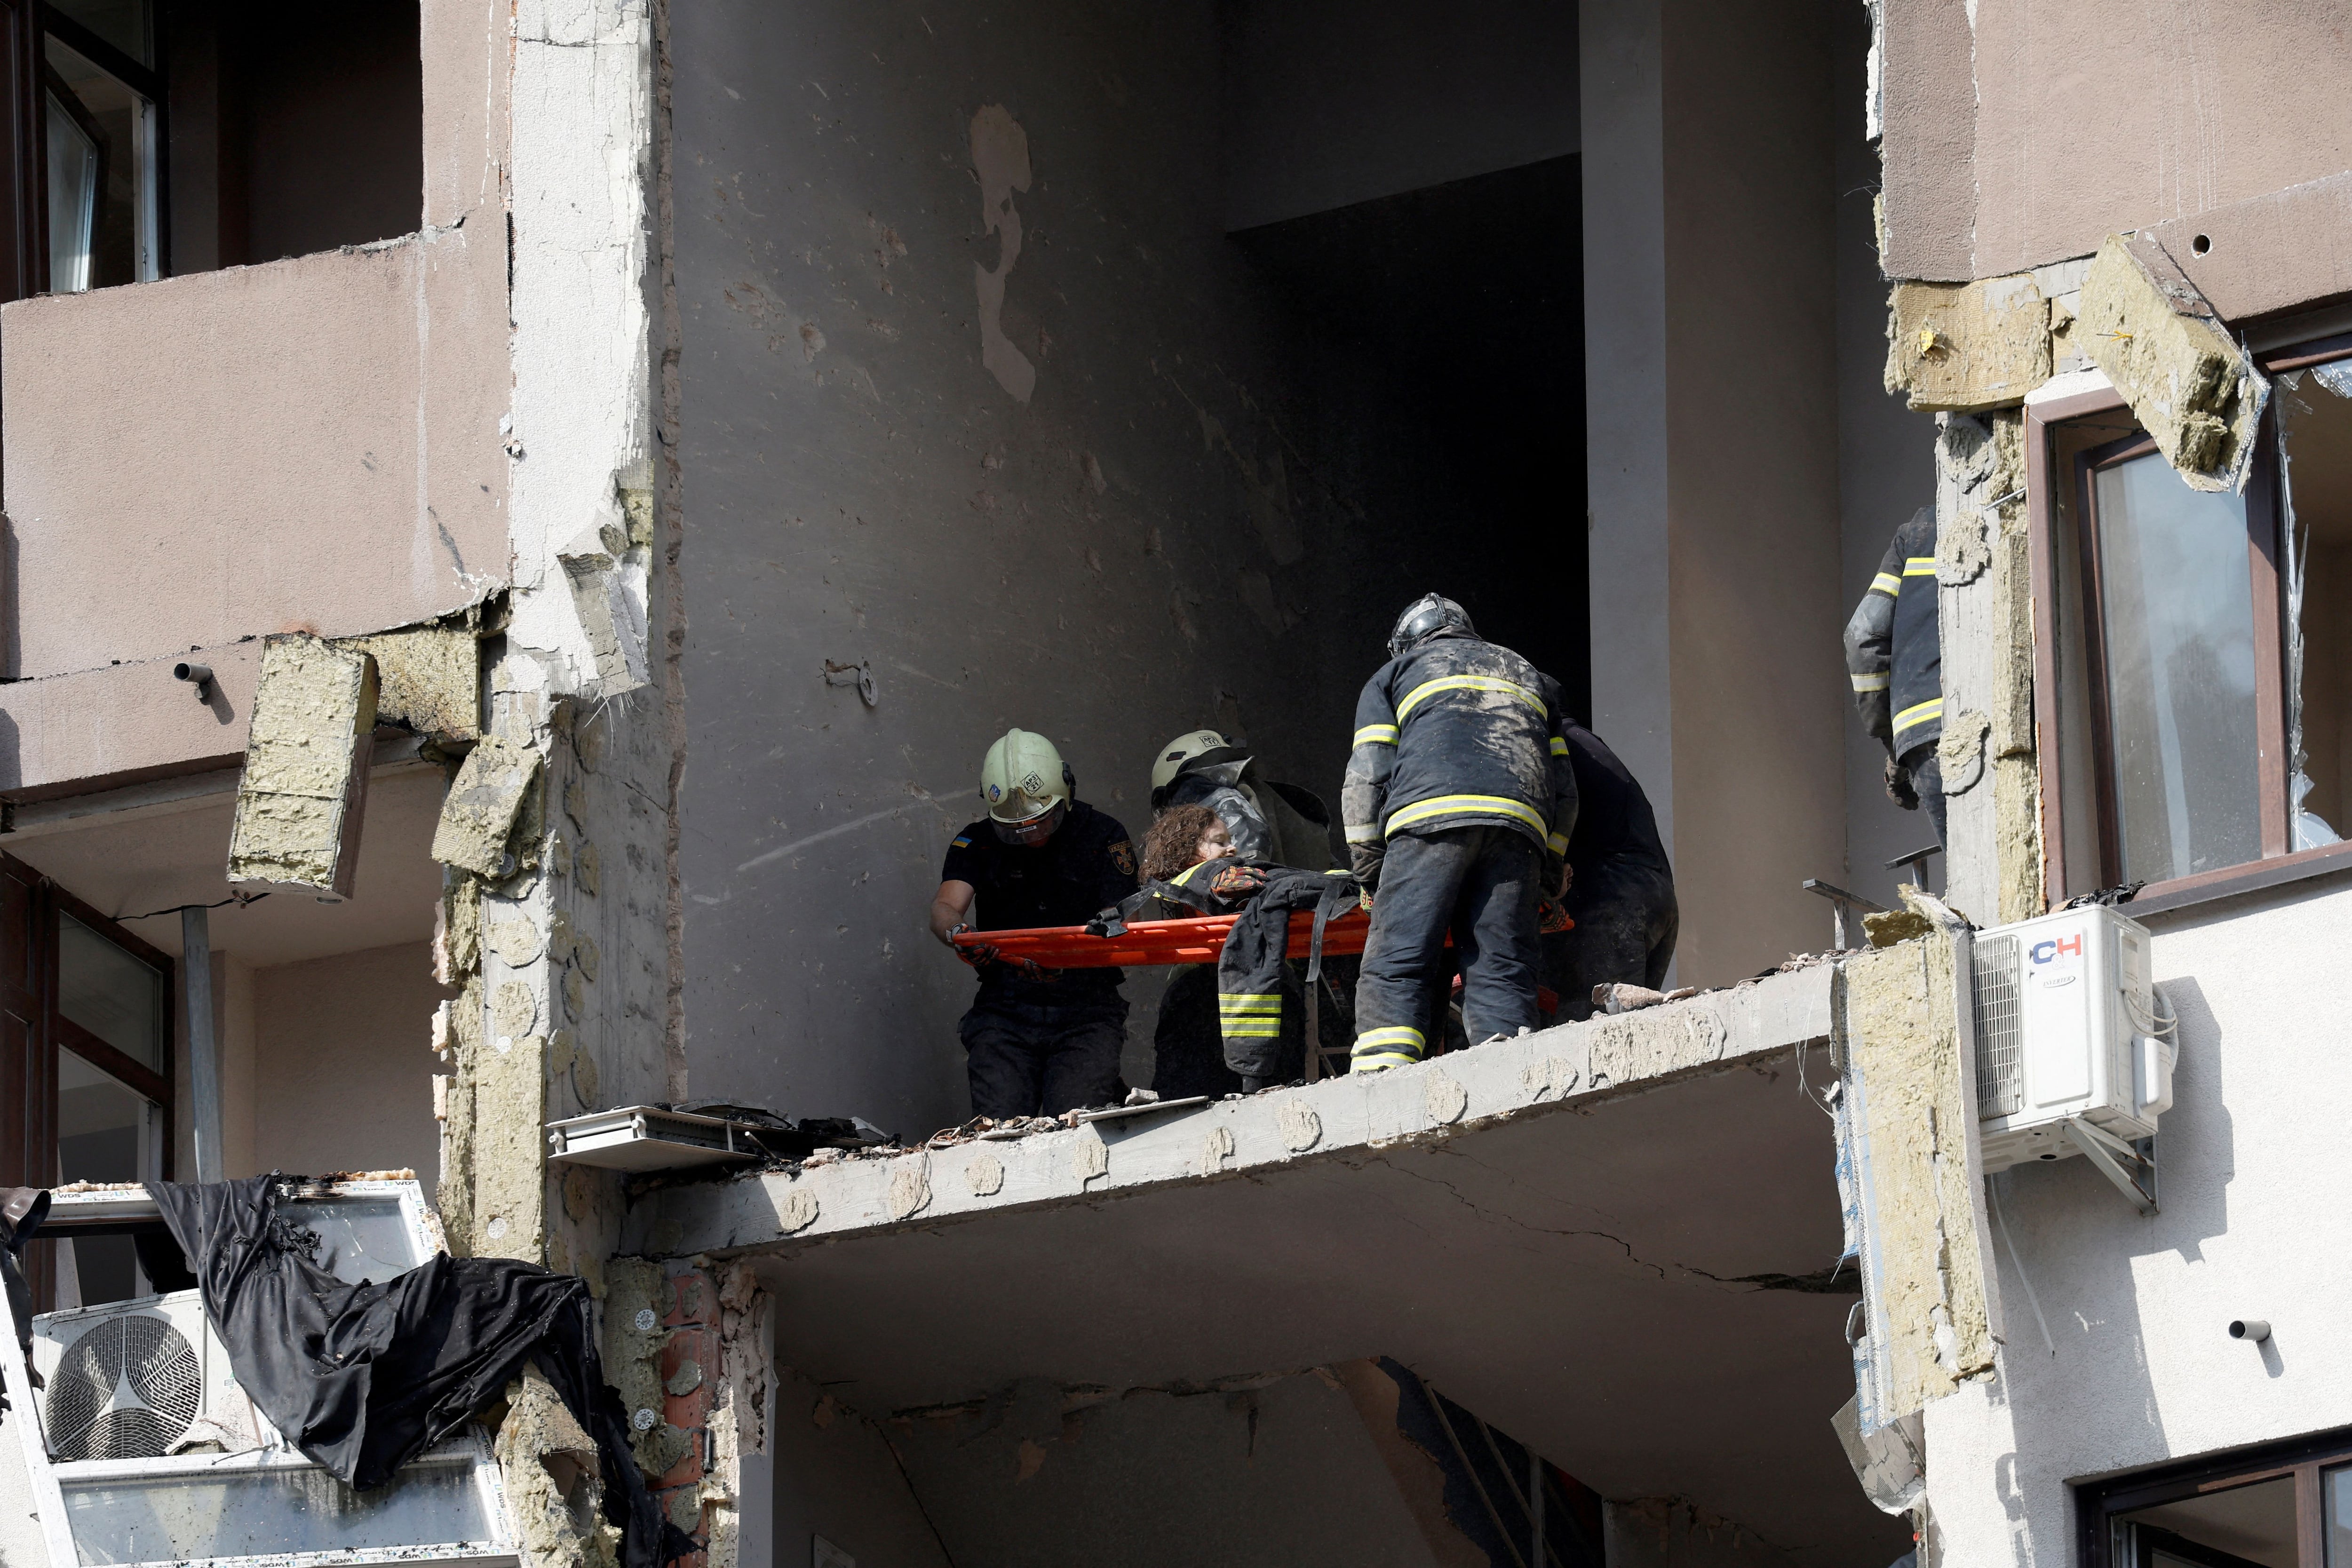 Rescue workers evacuate a person from a residential building damaged by a Russian missile strike, as Russia's attack on Ukraine continues, in Kyiv, Ukraine June 26, 2022. REUTERS/Valentyn Ogirenko